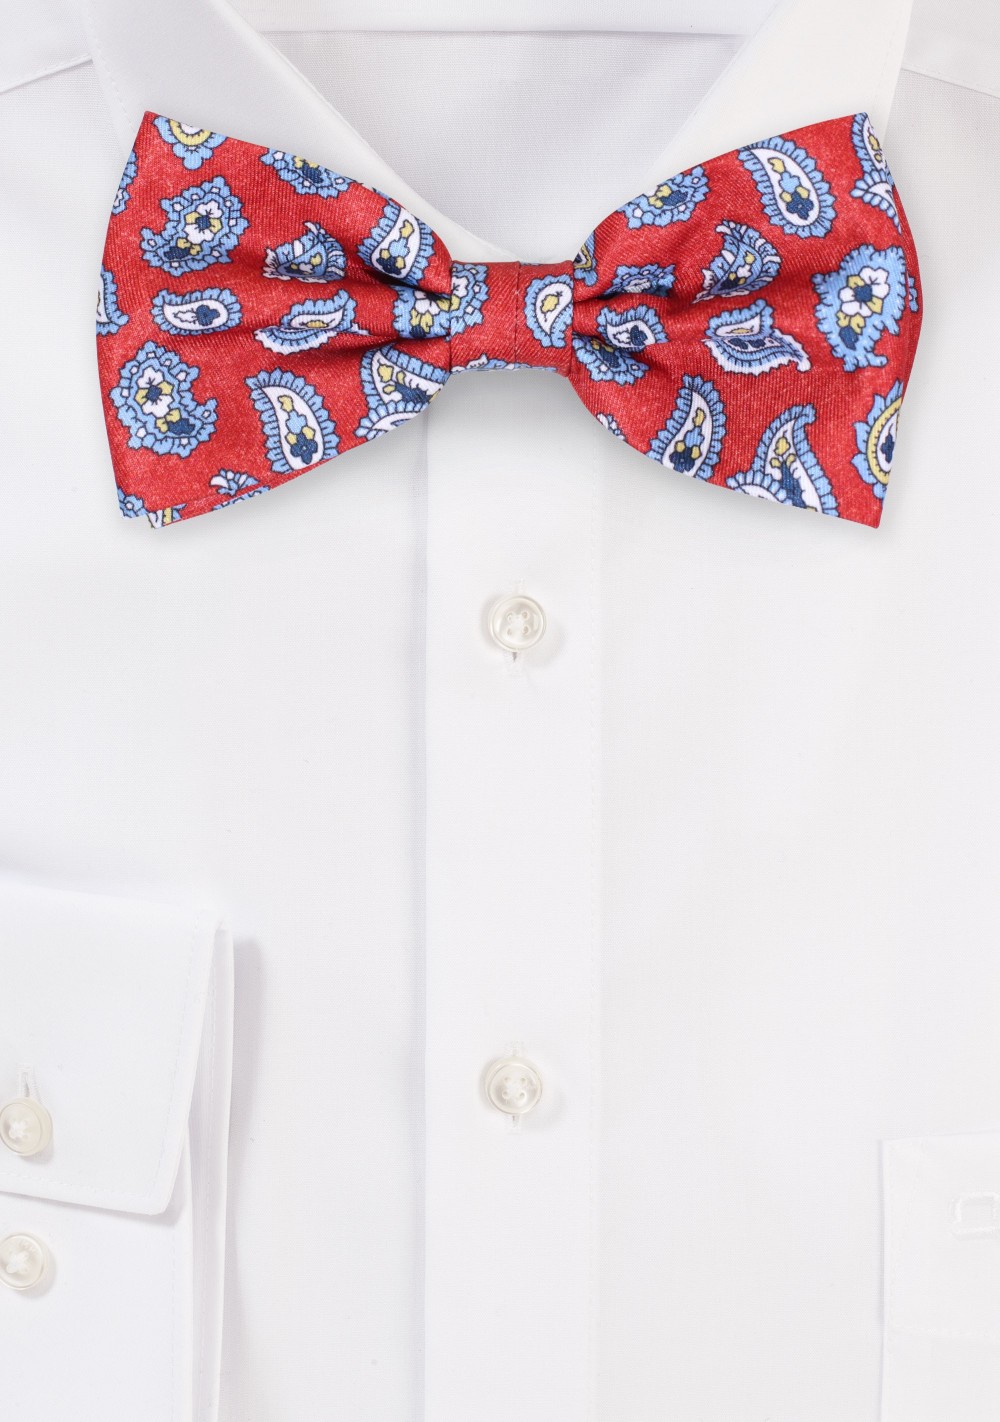 Paisley Print Bow Tie in Red, Light Blue, White, and Yellow